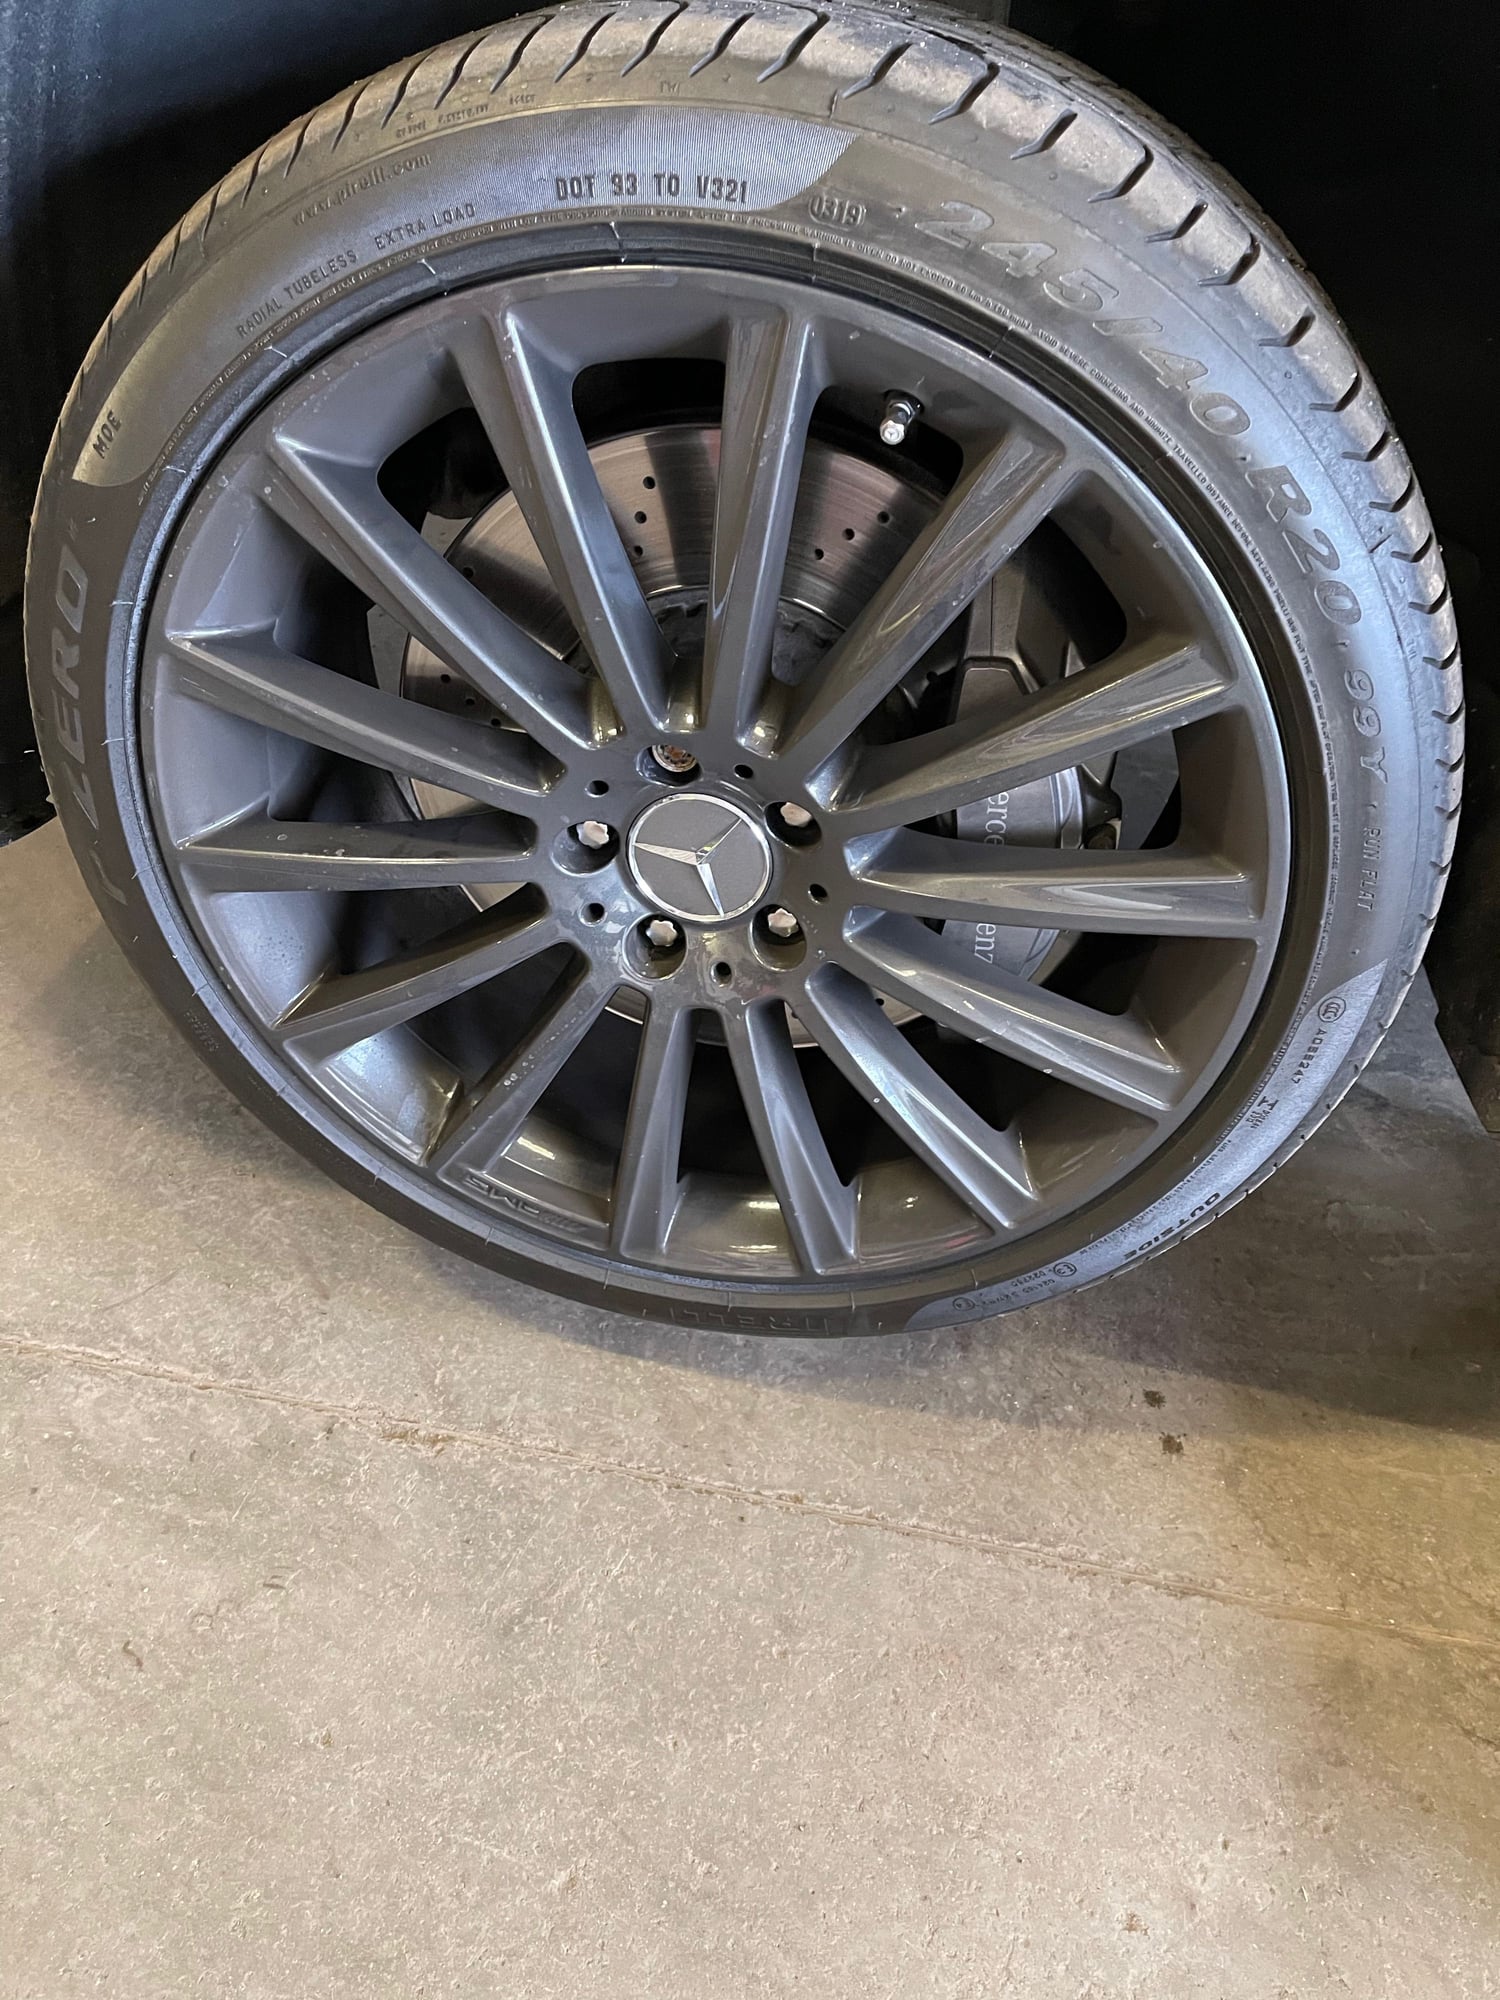 Wheels and Tires/Axles - AMG original 20 inch wheels / tires : 245/40 front 275/35 rear Pirelli MINT - Used - 0  All Models - Aurora, CO 80016, United States